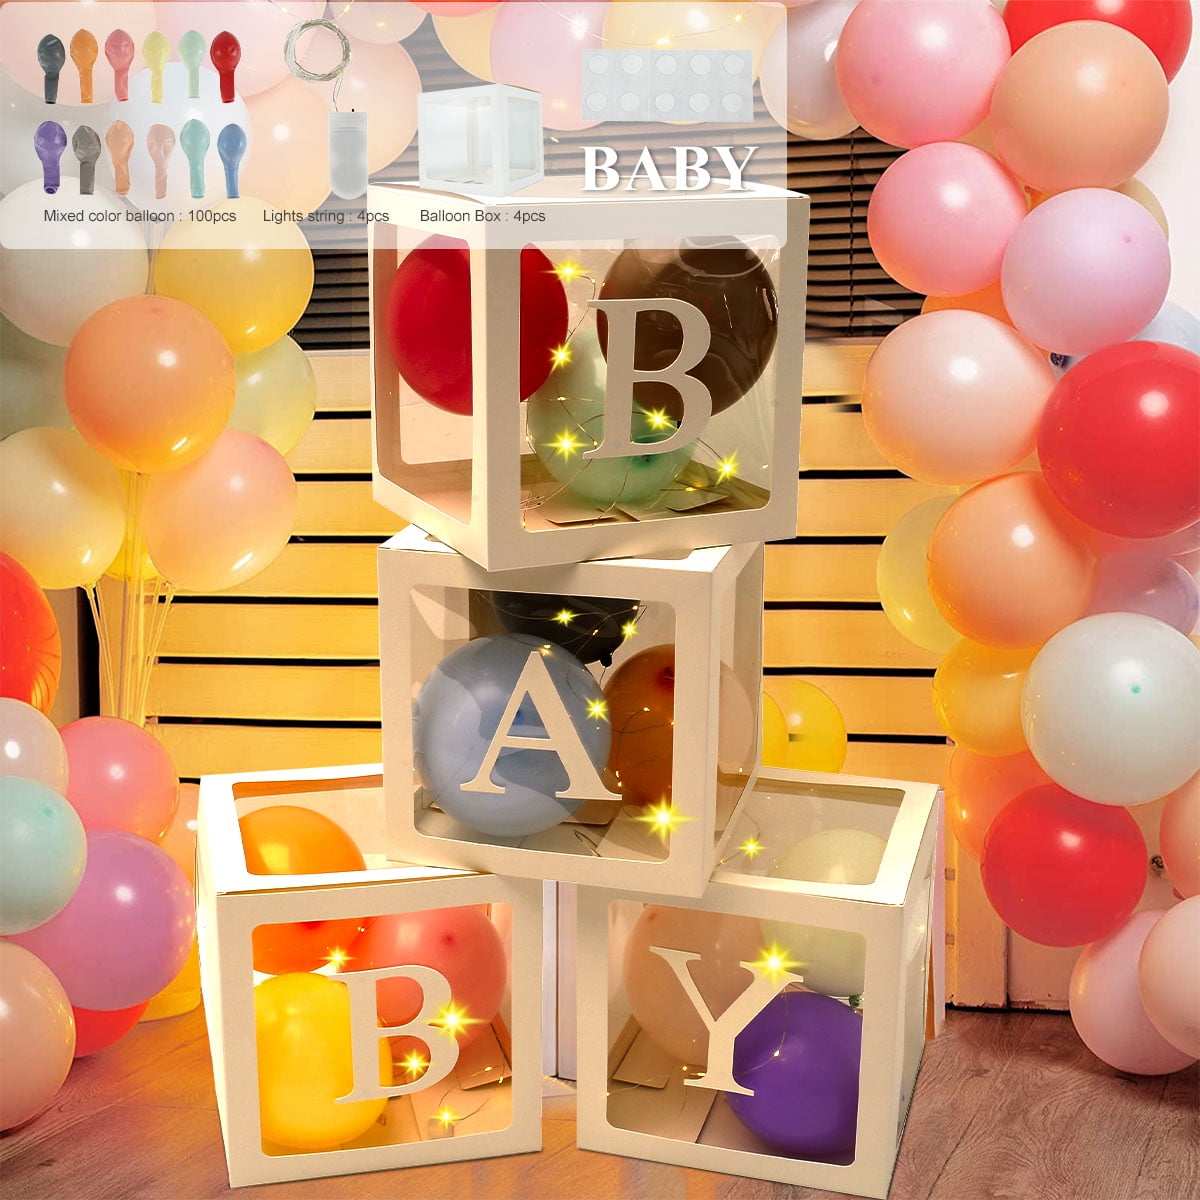 Baby Shower Balloons Boxes 4 Pieces Transparent Balloon Blocks with LED Firefly String Lights Macaron Rainbow Balloons for Gender Reveal Baby Shower Birthday Party Decorations